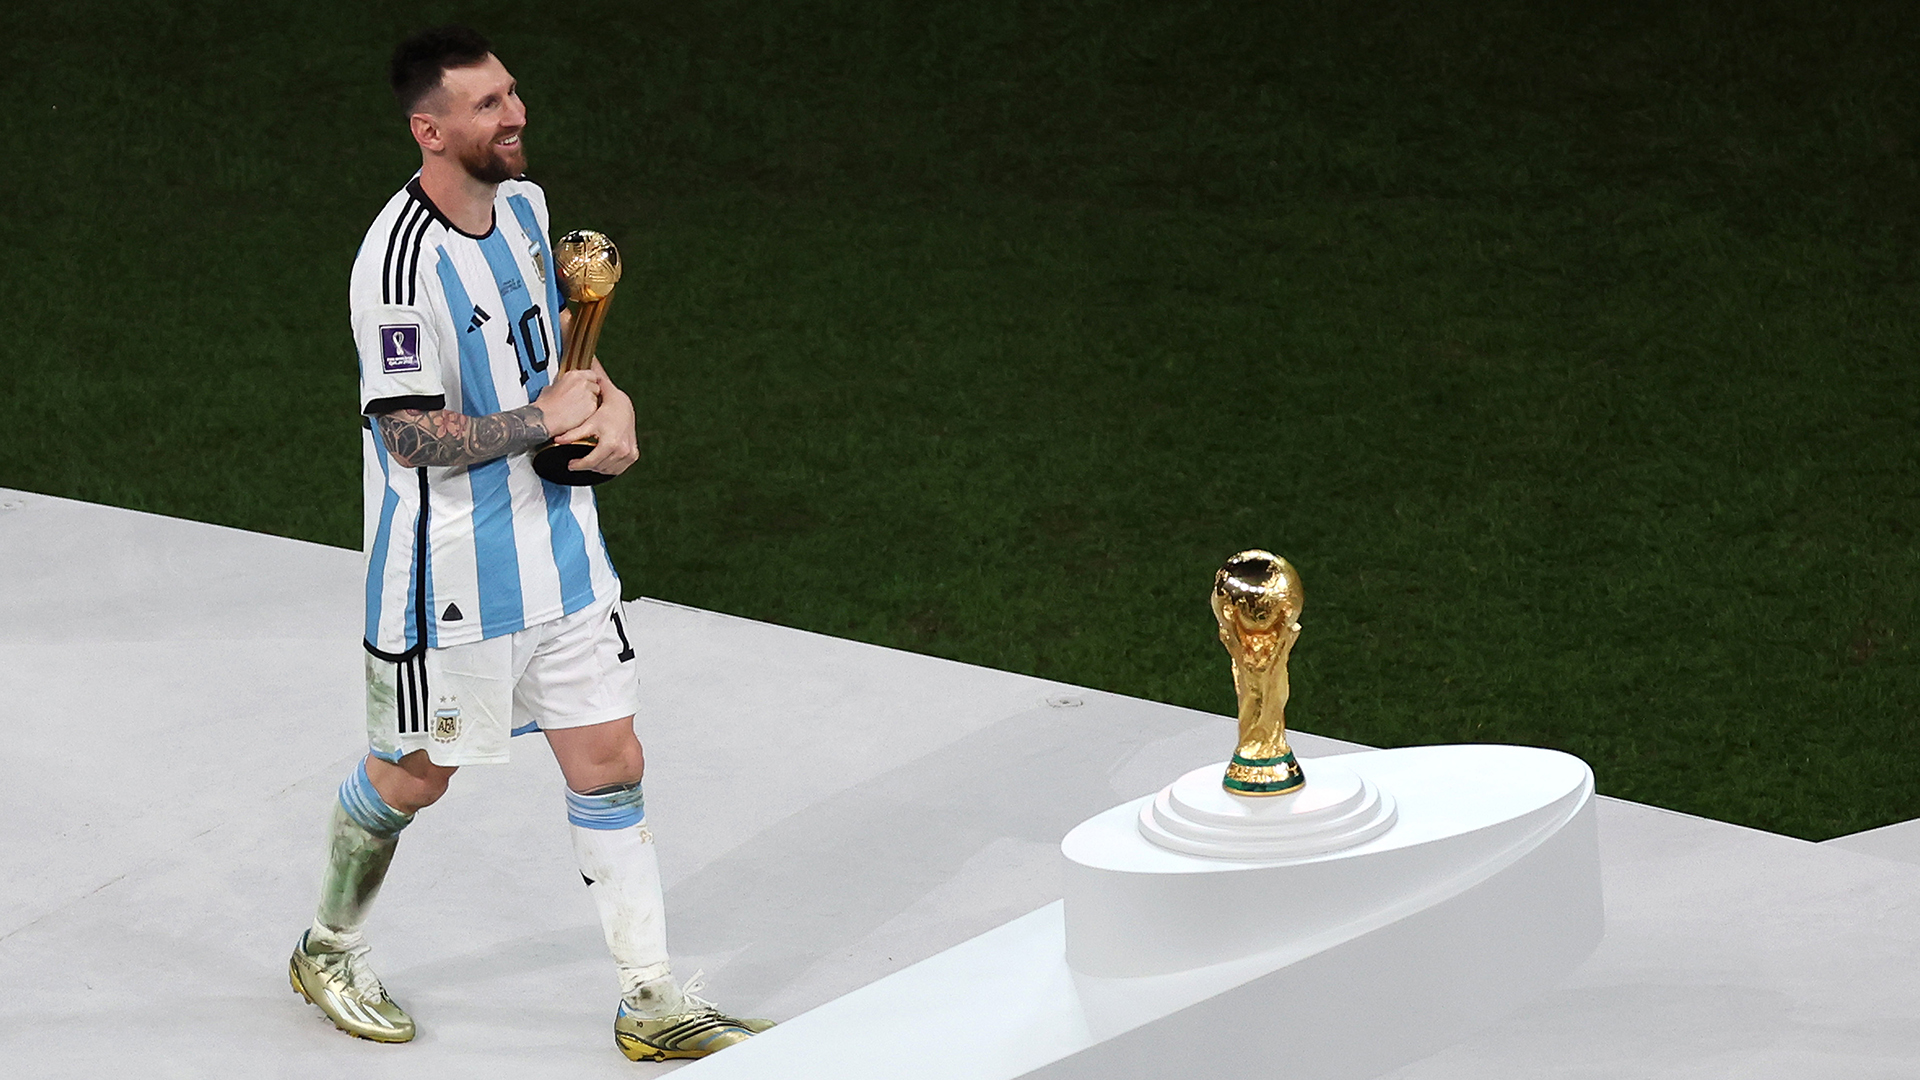 Lionel Messi of Argentina poses with his Golden ball award following the FIFA World Cup Qatar 2022 Final match between Argentina and France at Lusail Stadium on December 18, 2022 in Lusail City, Qatar.